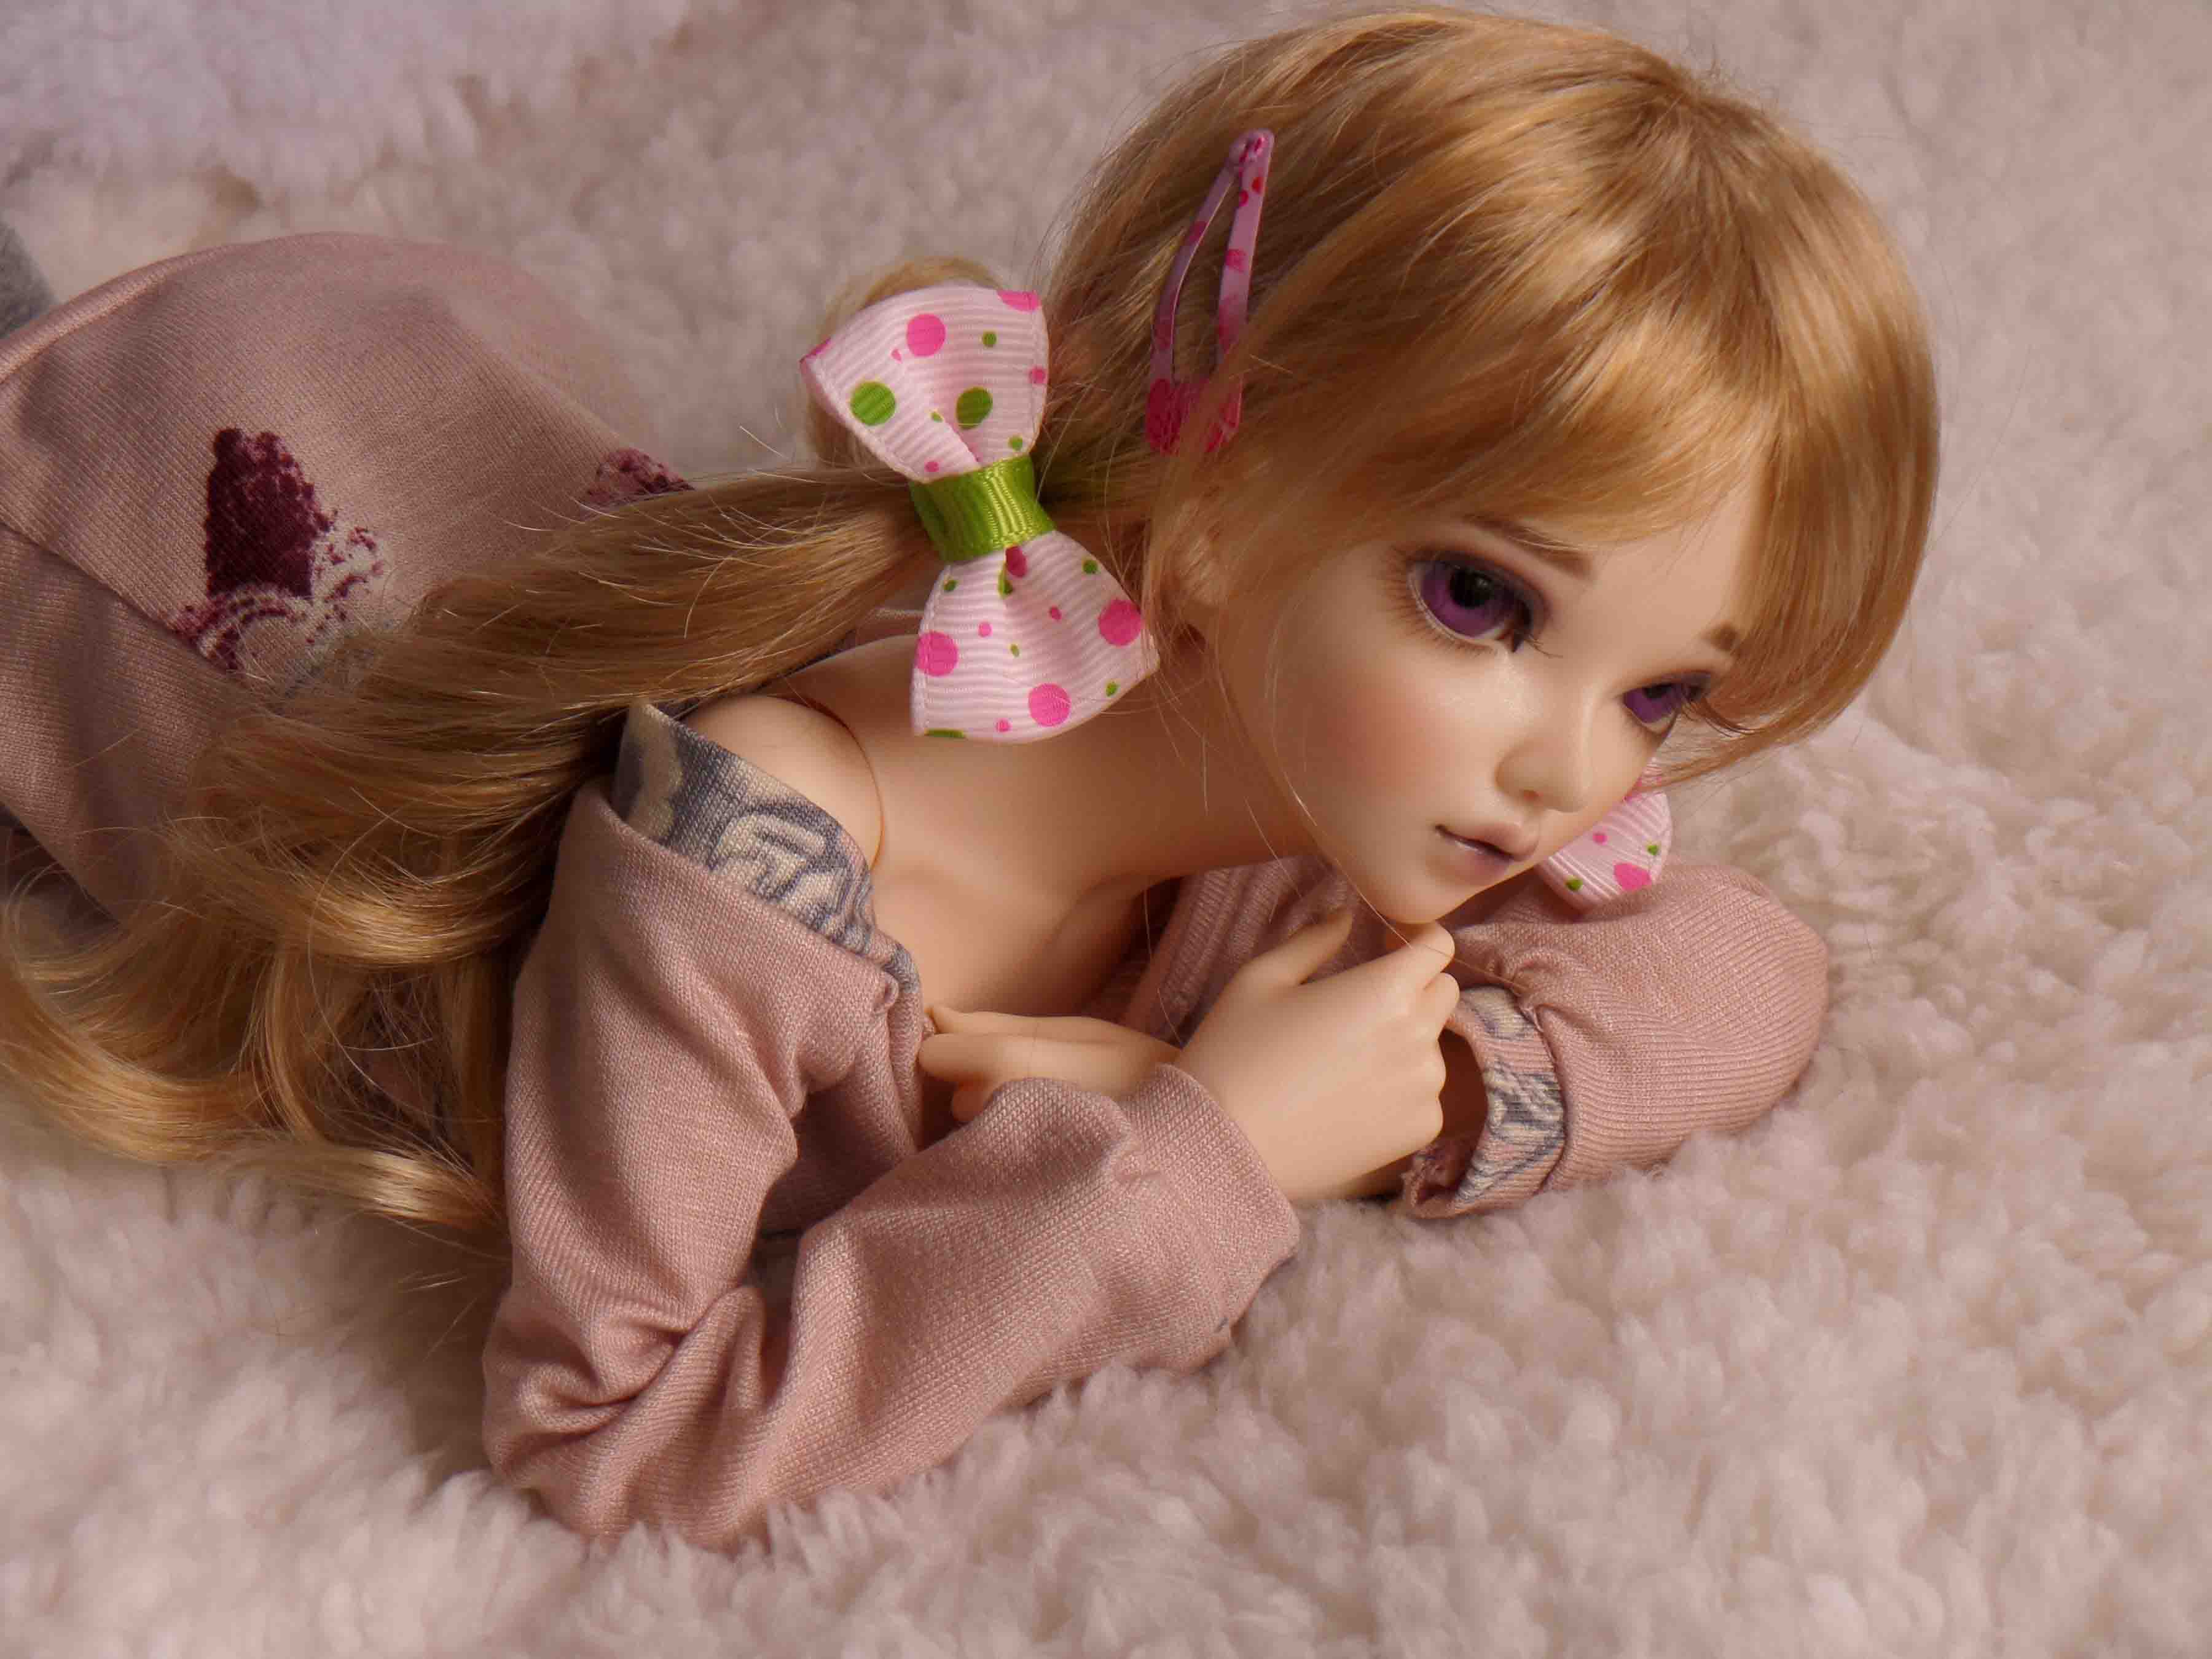 Beautiful And Cute Dolls Wallpaper Wallpapers